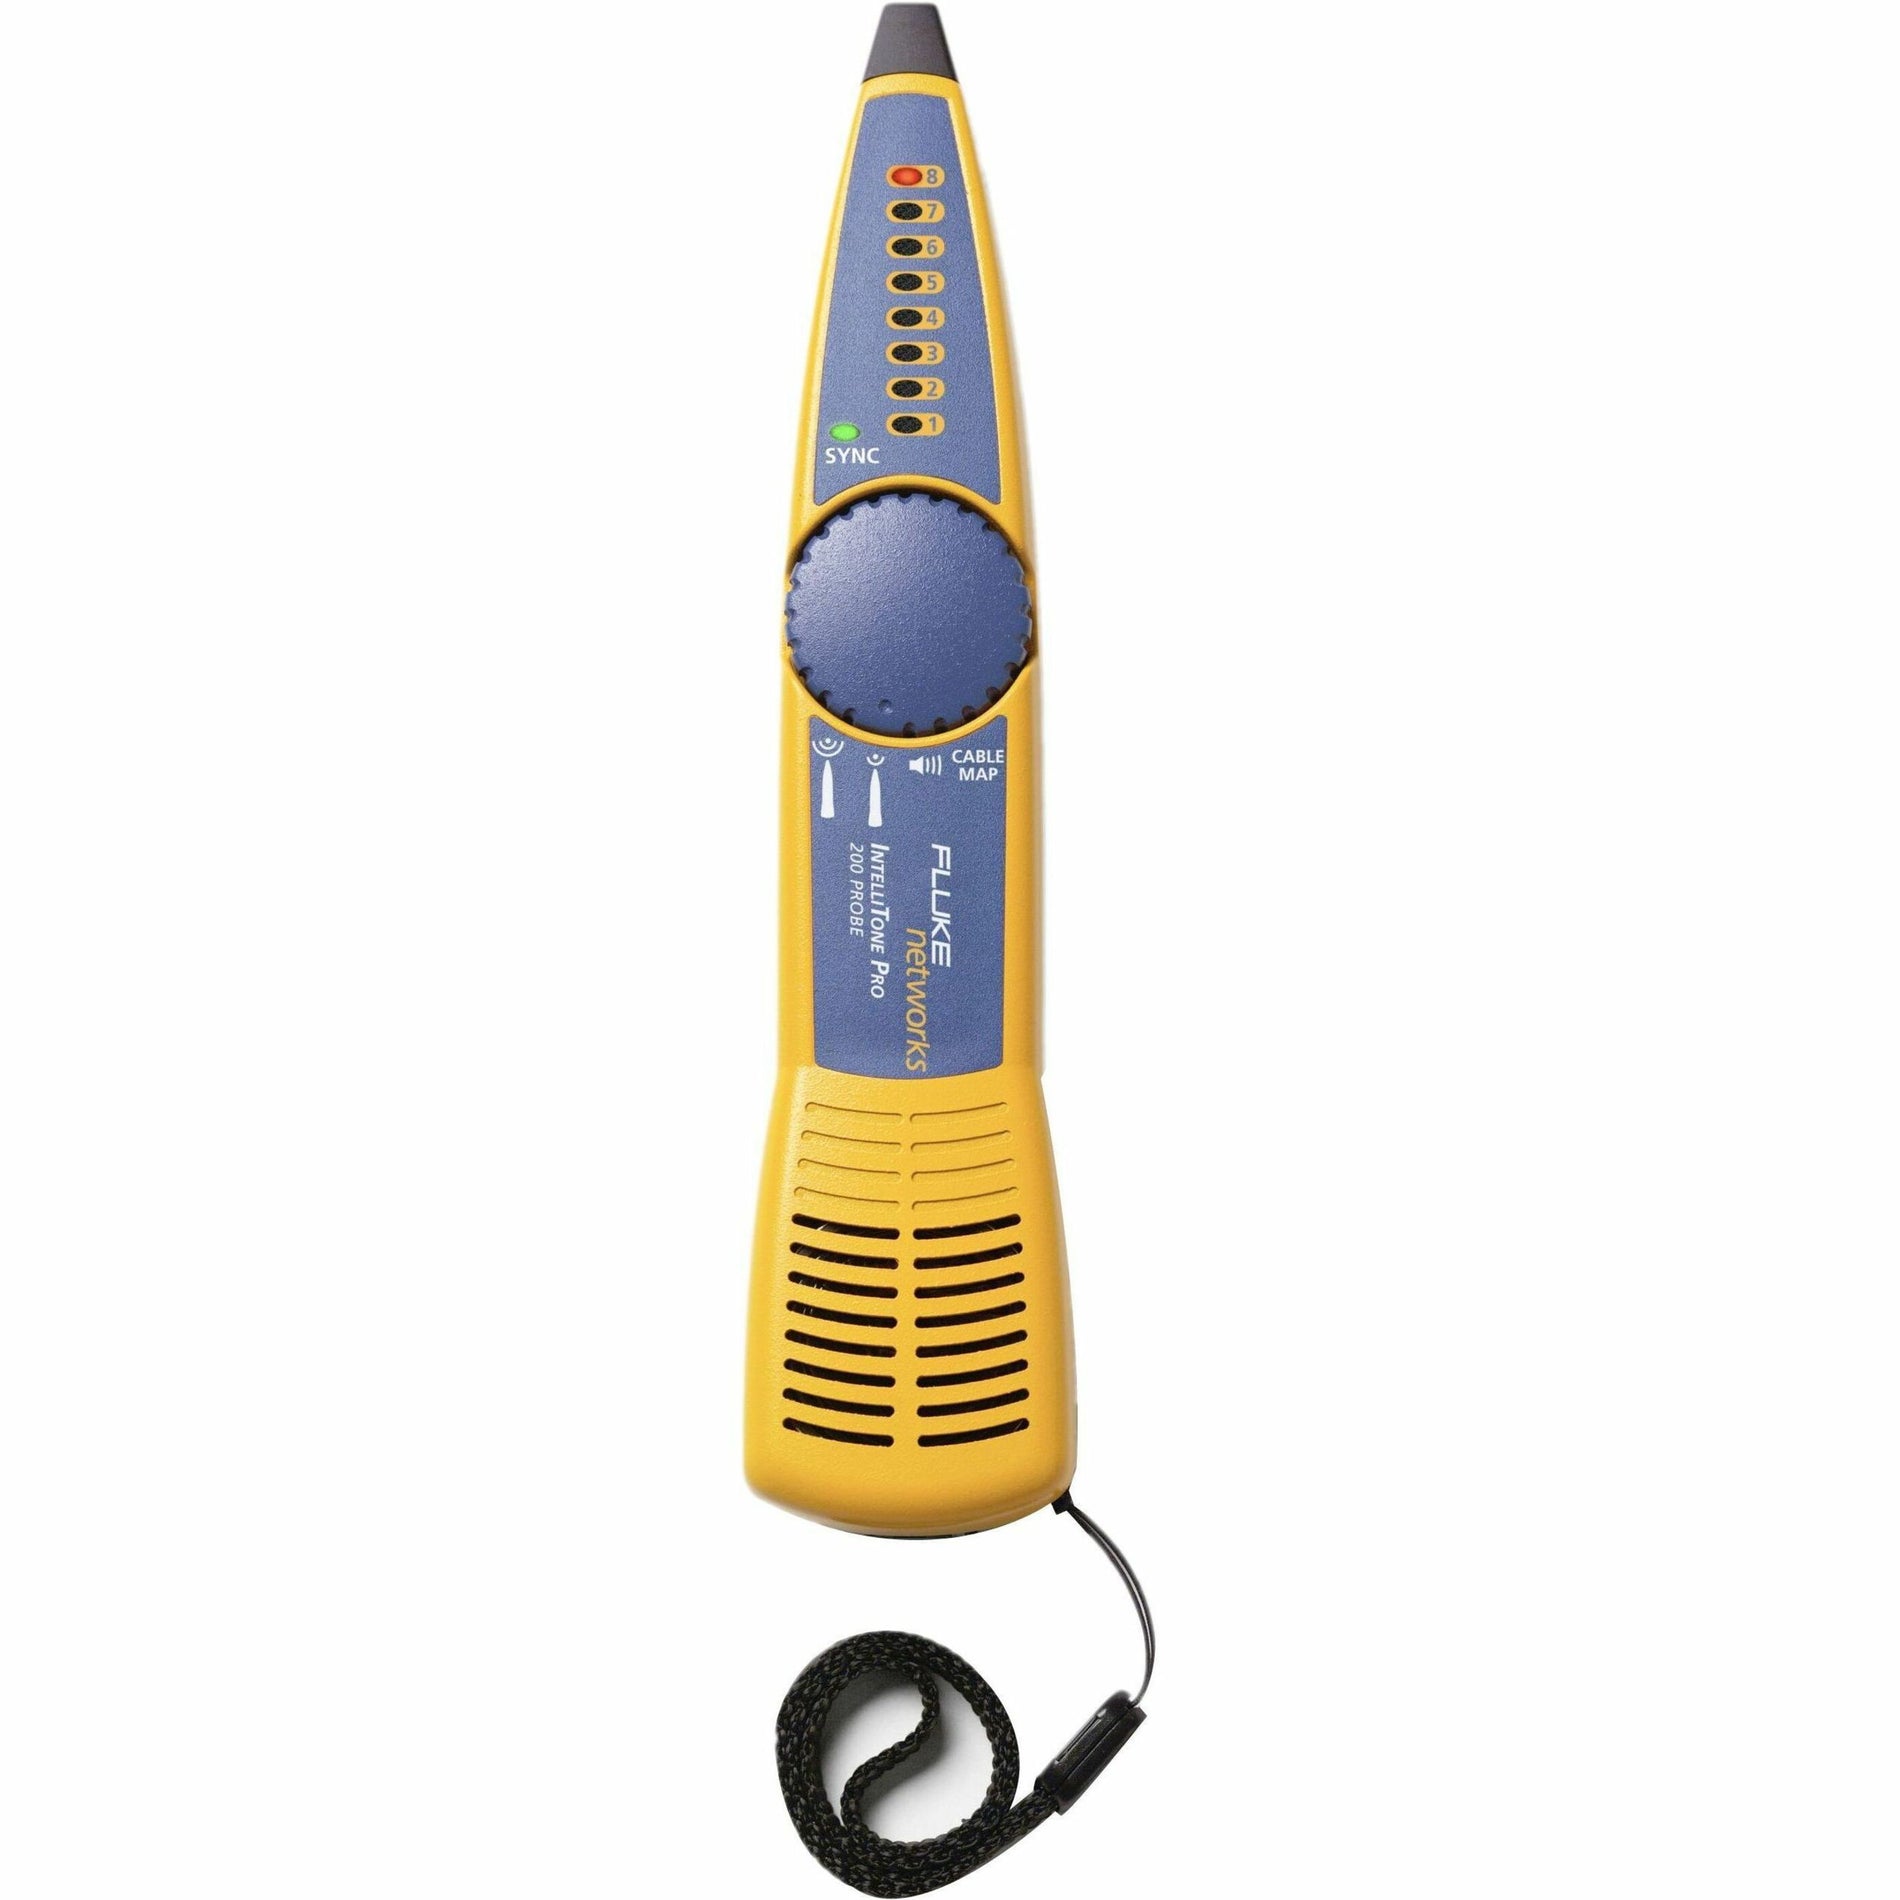 Fluke Networks MT-8200-63A IntelliTone 200 Probe, Network Cable Tester with Reversed Pair and Short Circuit Testing